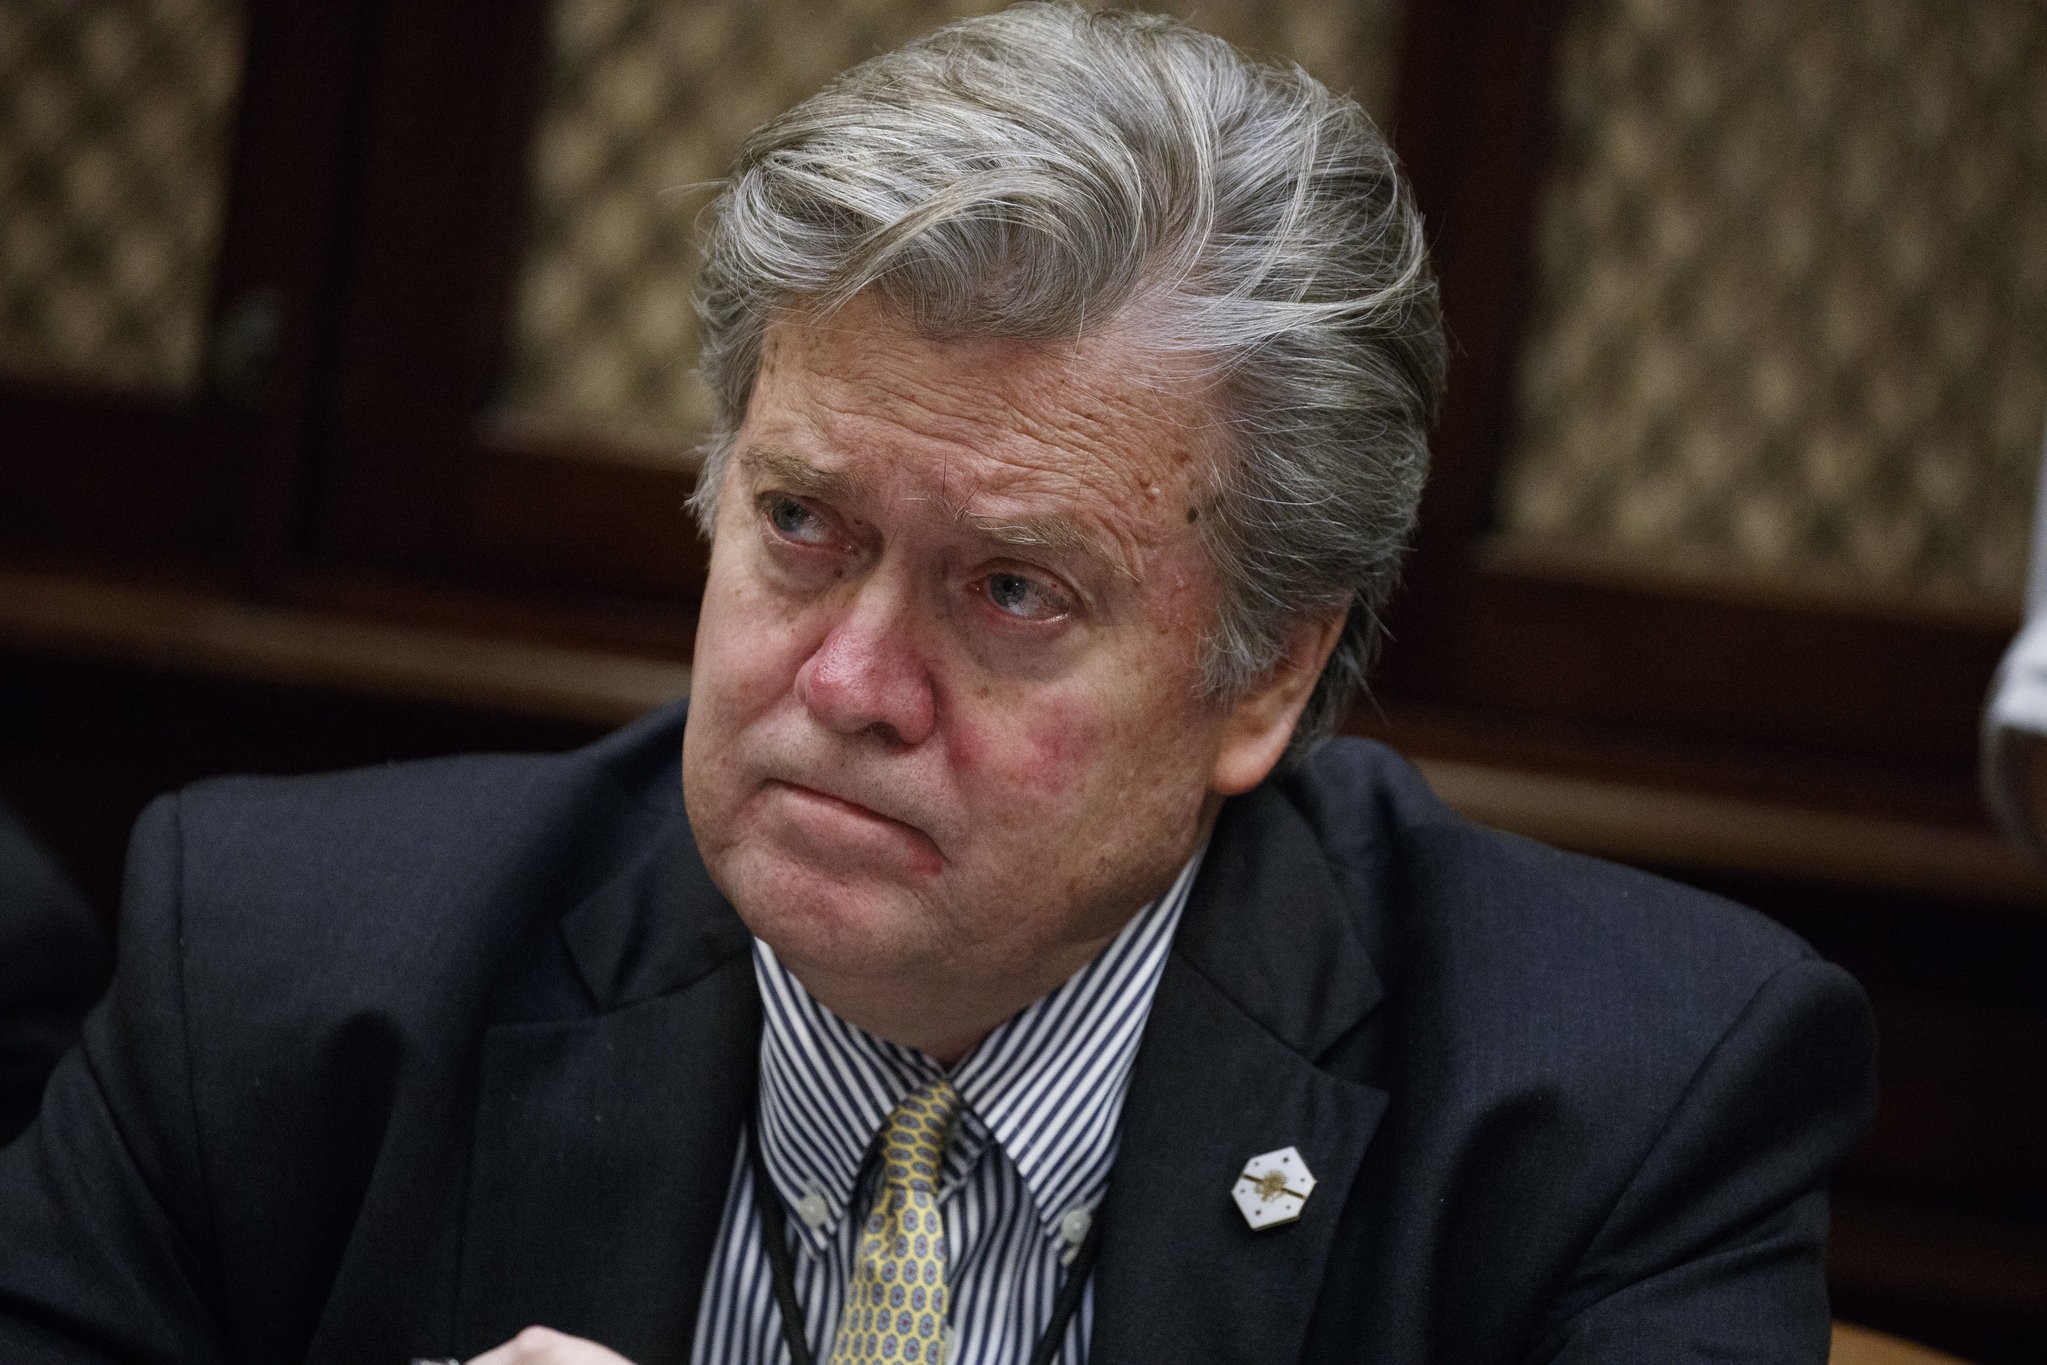 In this Feb. 7, 2017 file photo, White House chief strategist Steve Bannon is seen in the Roosevelt Room of the White House in Washington. (AP Photo)